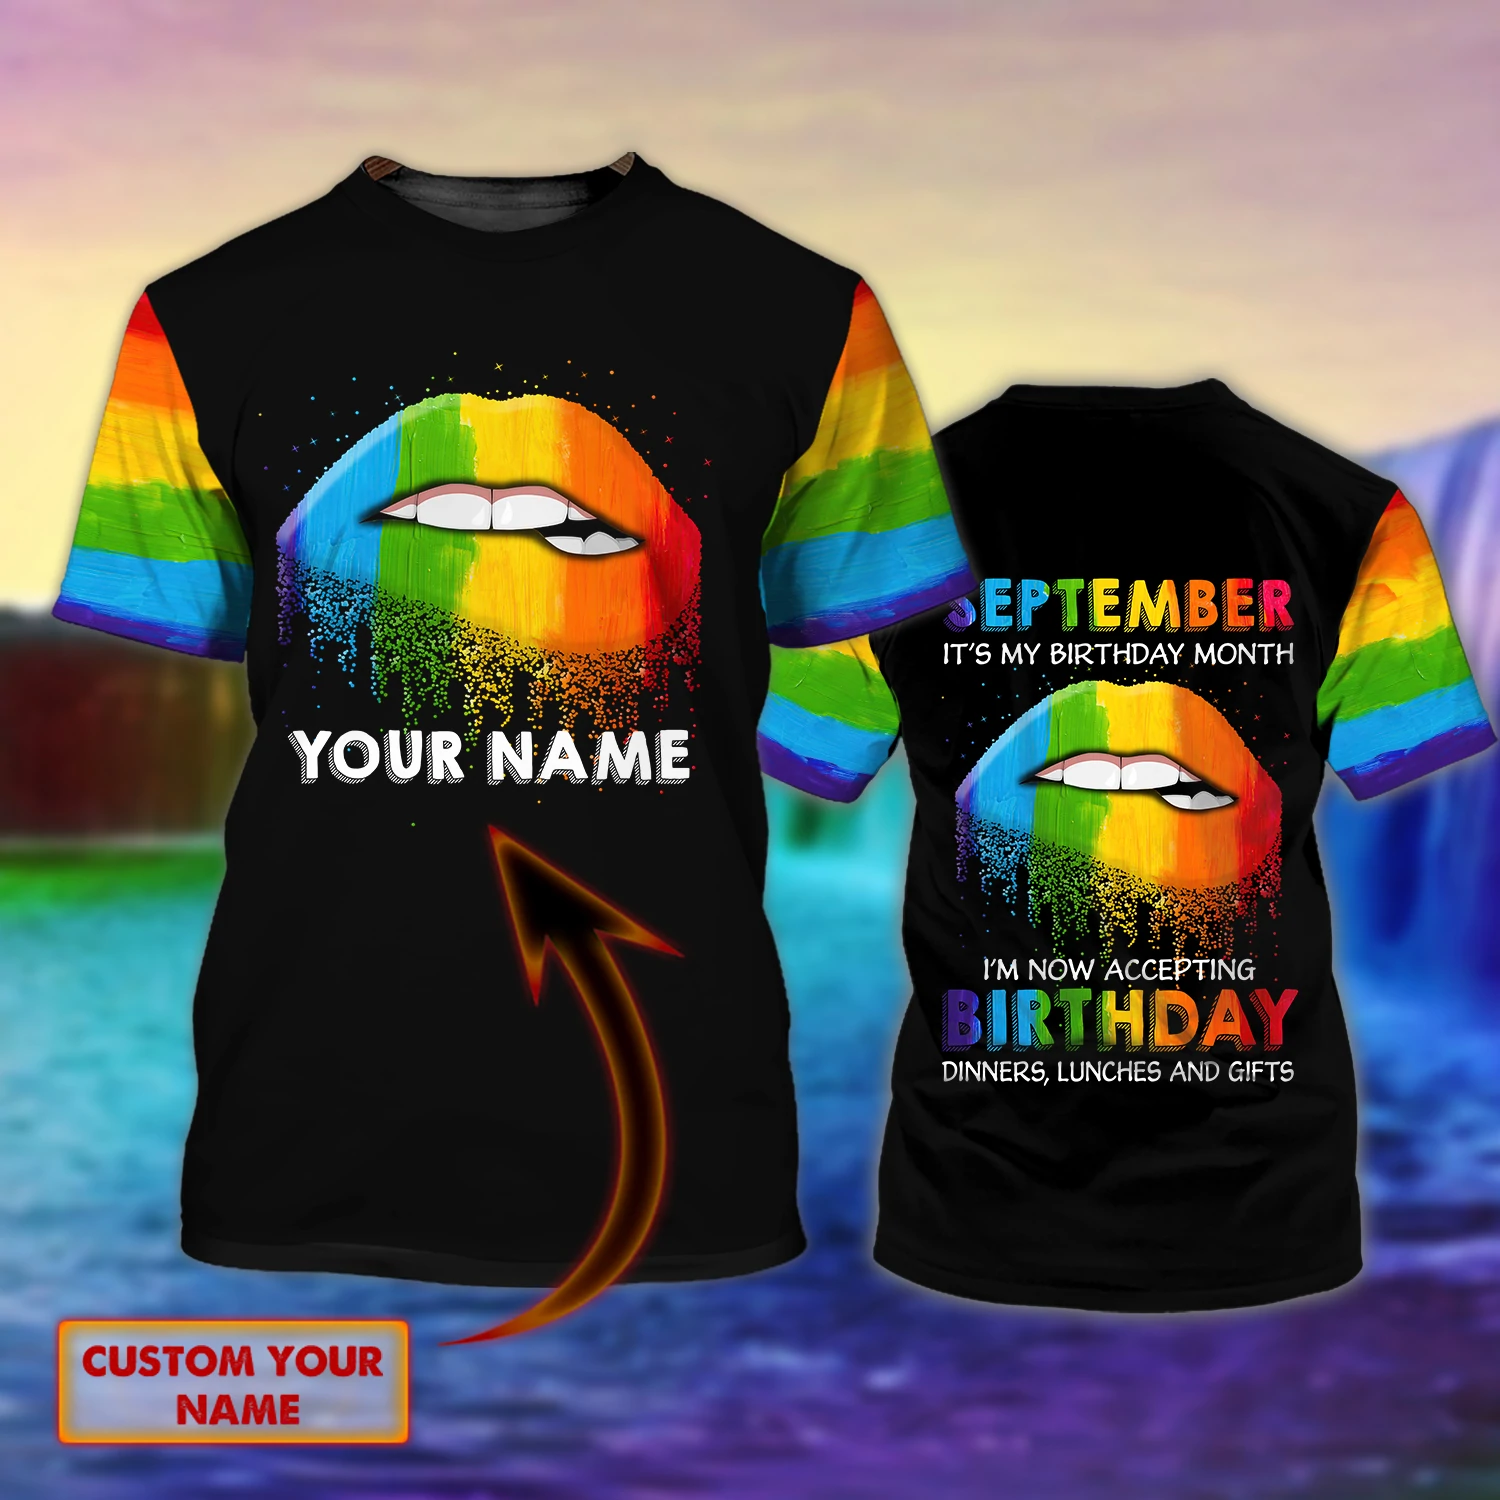 Personalized with name birthday gifts for gay men in September/ lesbian birthday September gift